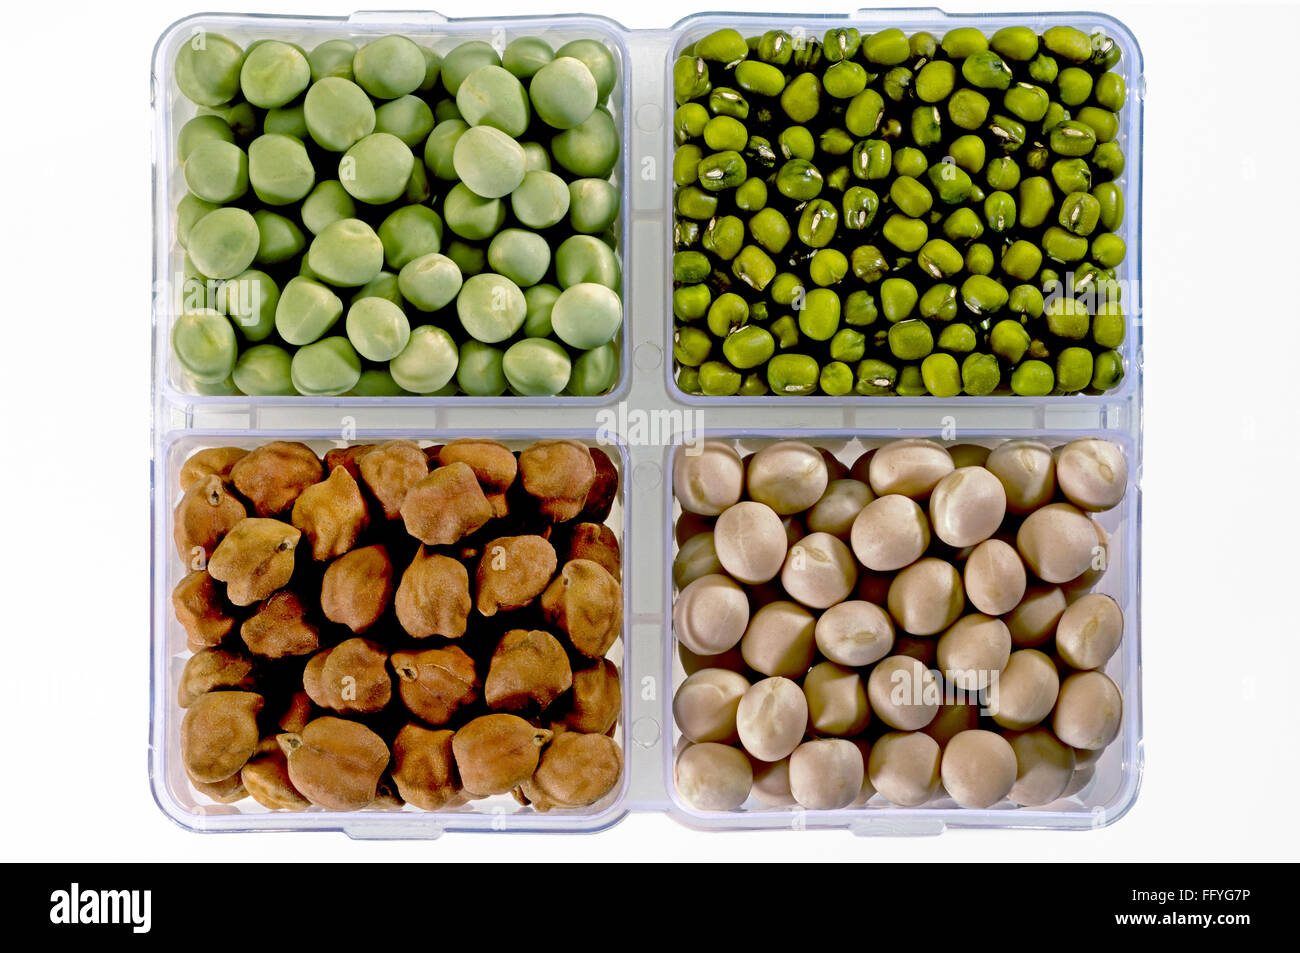 Pulses green peas green gram black chickpeas and white peas in square dish ; India Stock Photo